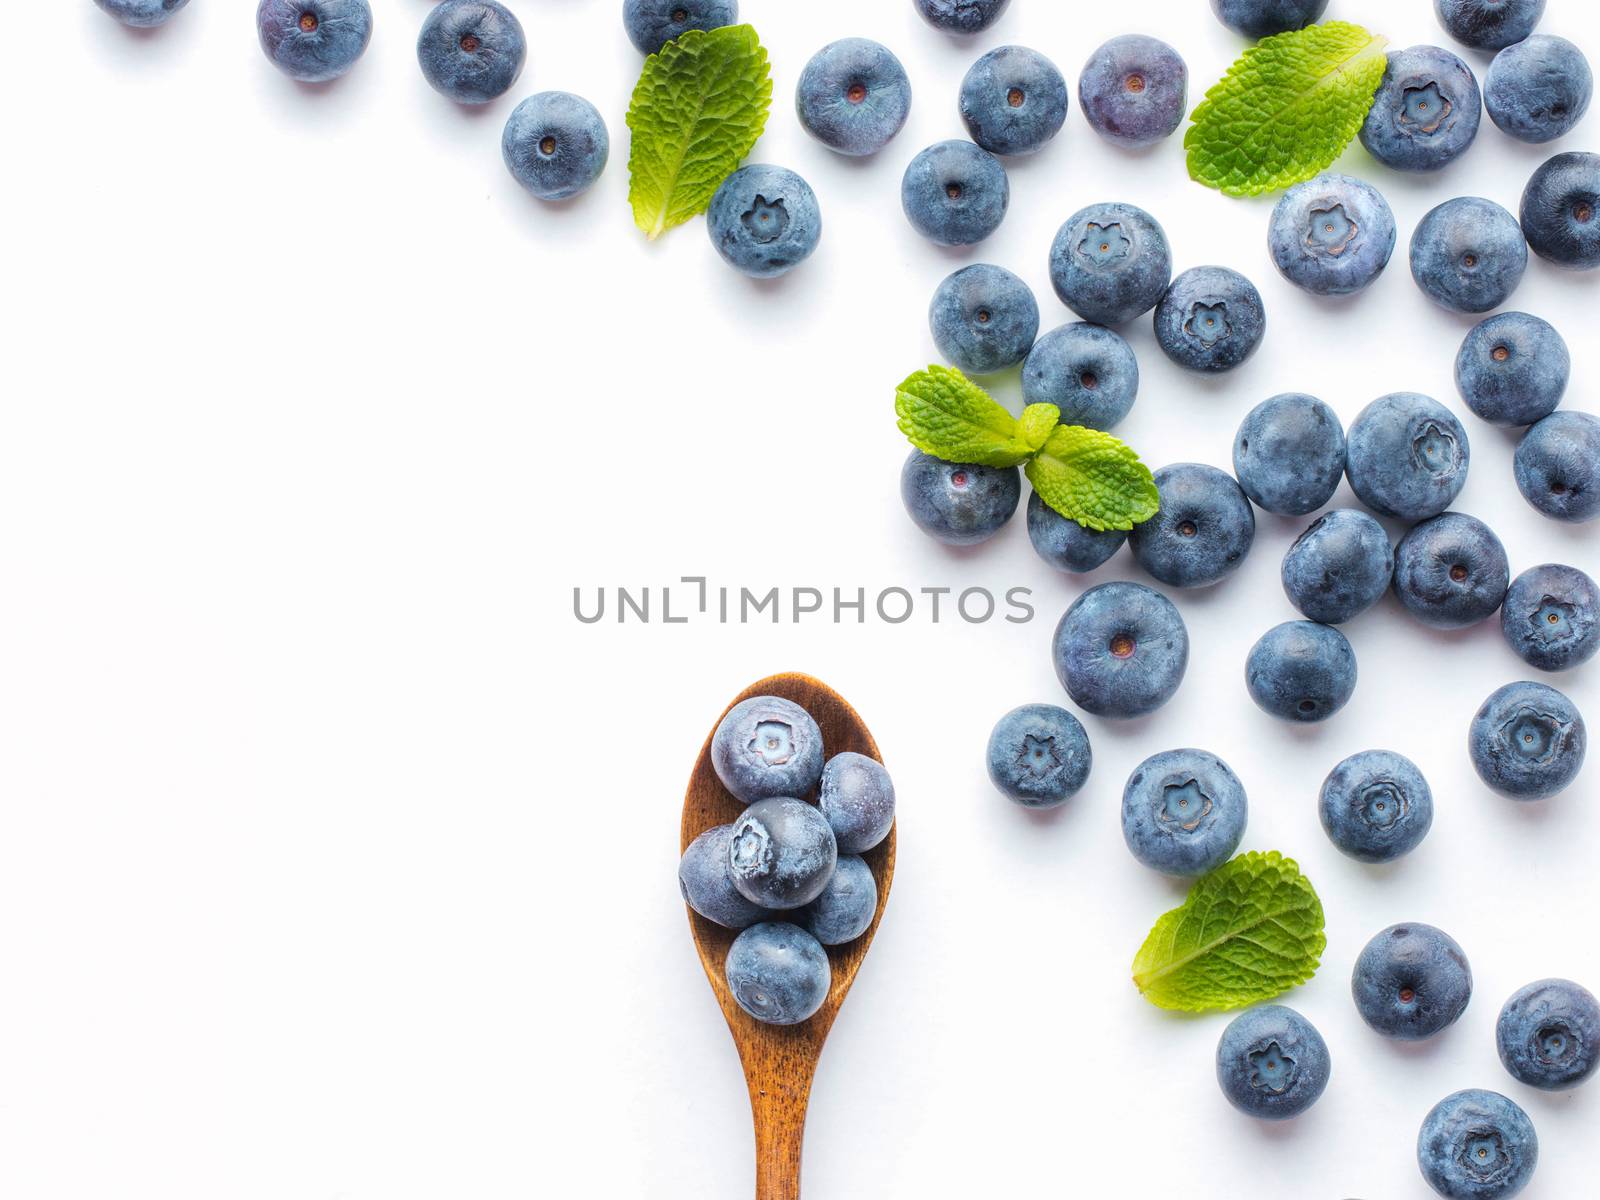 Blueberries isolated on white background. Blueberry border design. Ripe and juicy fresh picked bilberries close up. Copyspace. Top view or flat lay